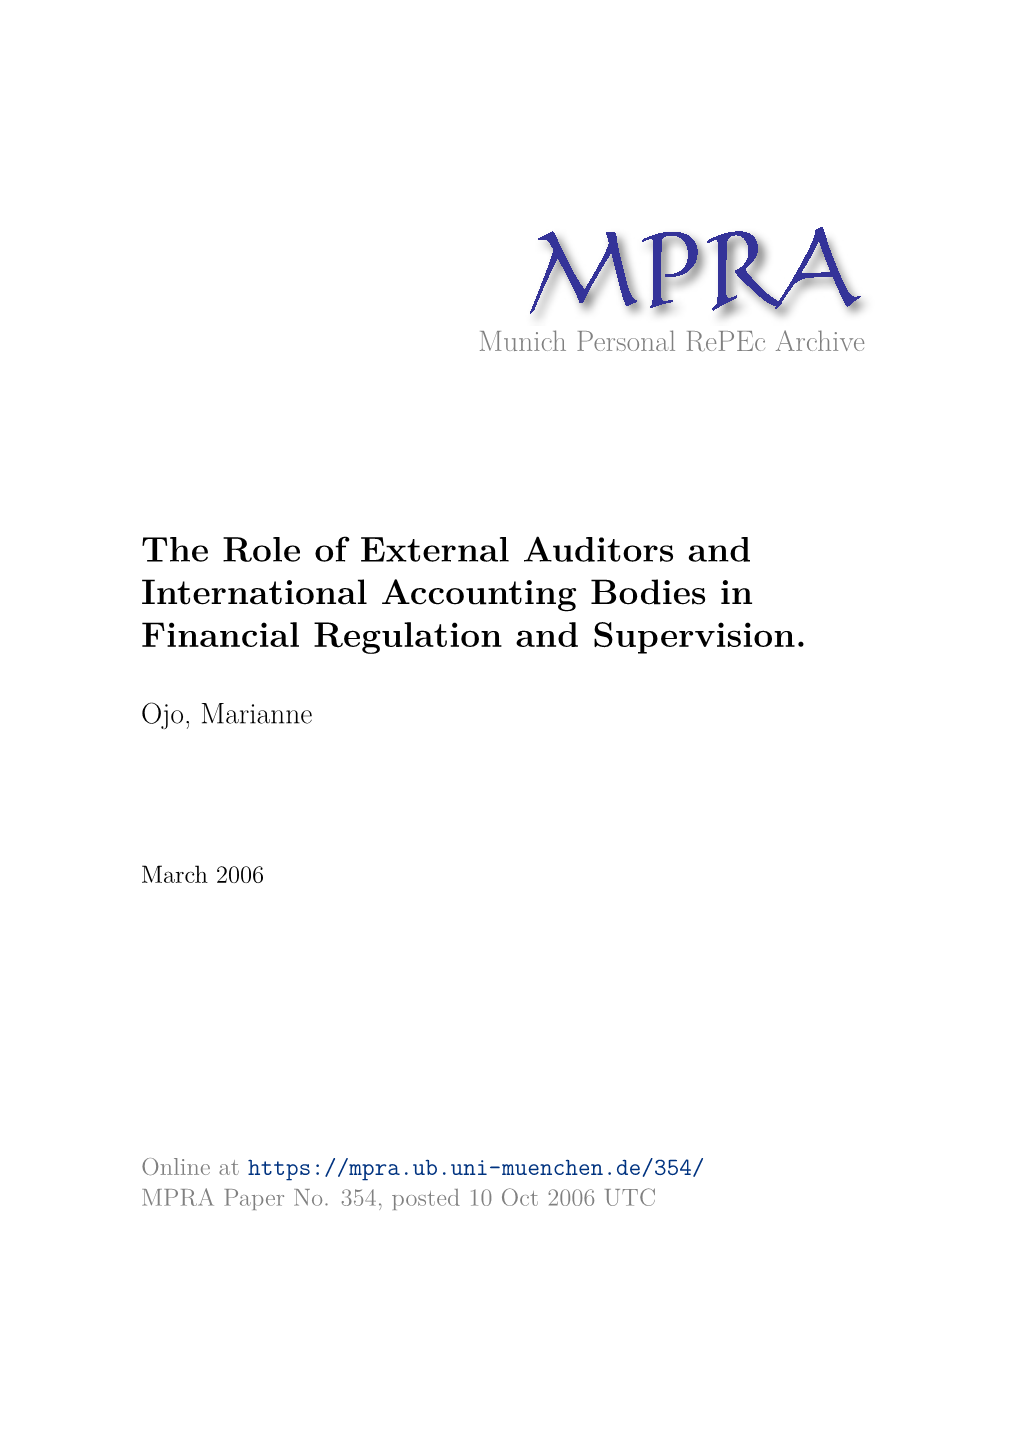 The Role of External Auditors and International Accounting Bodies in Financial Regulation and Supervision